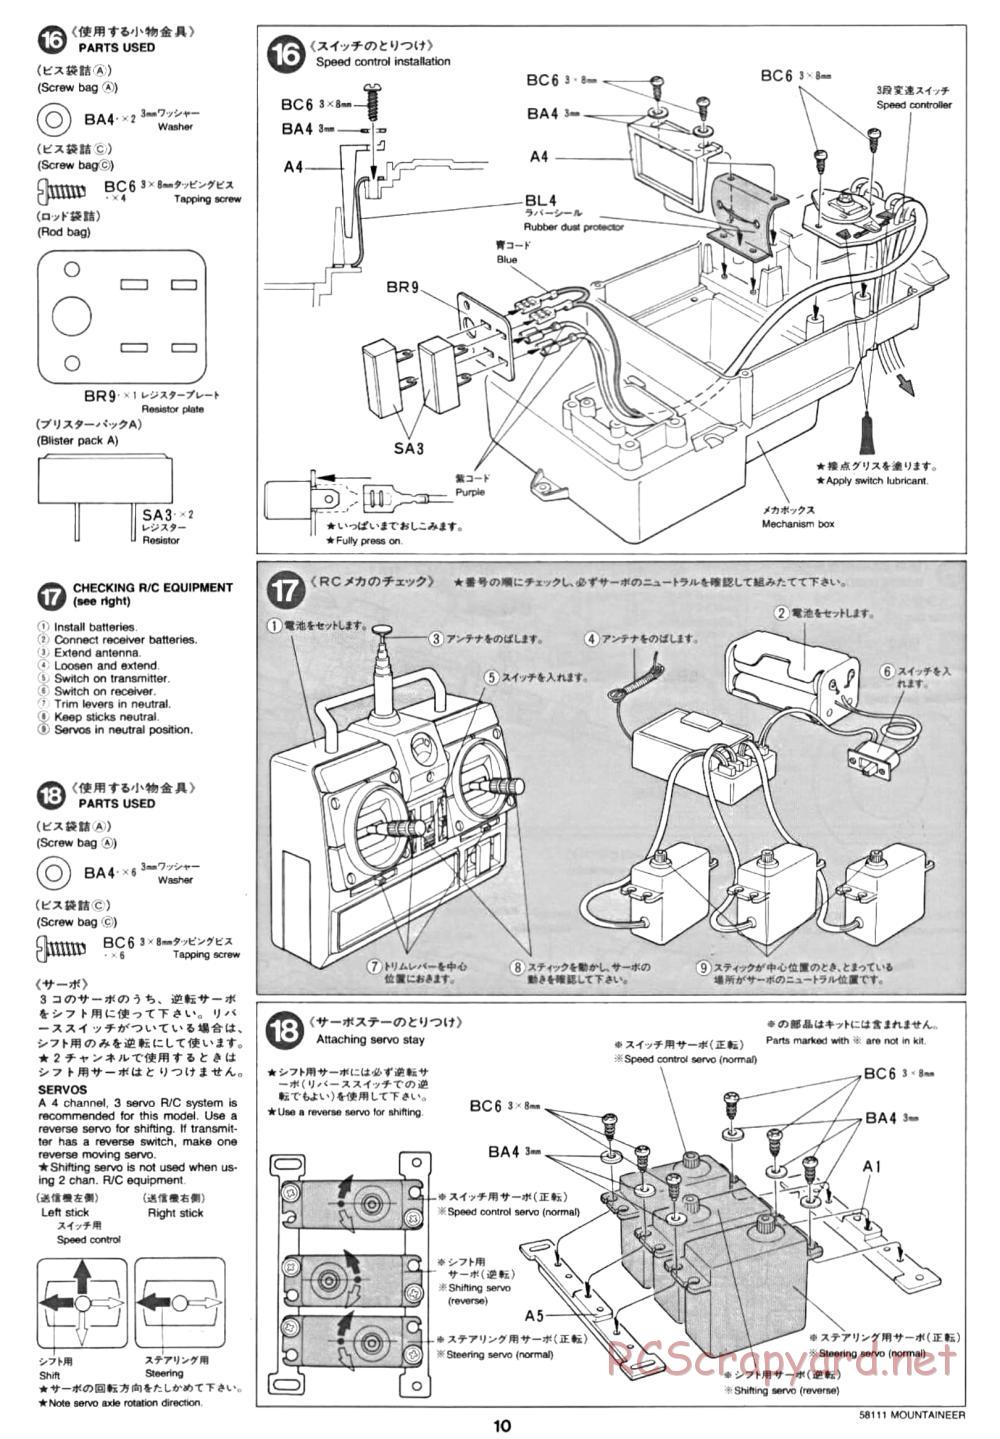 Tamiya - Toyota 4x4 Pick Up Mountaineer Chassis - Manual - Page 10